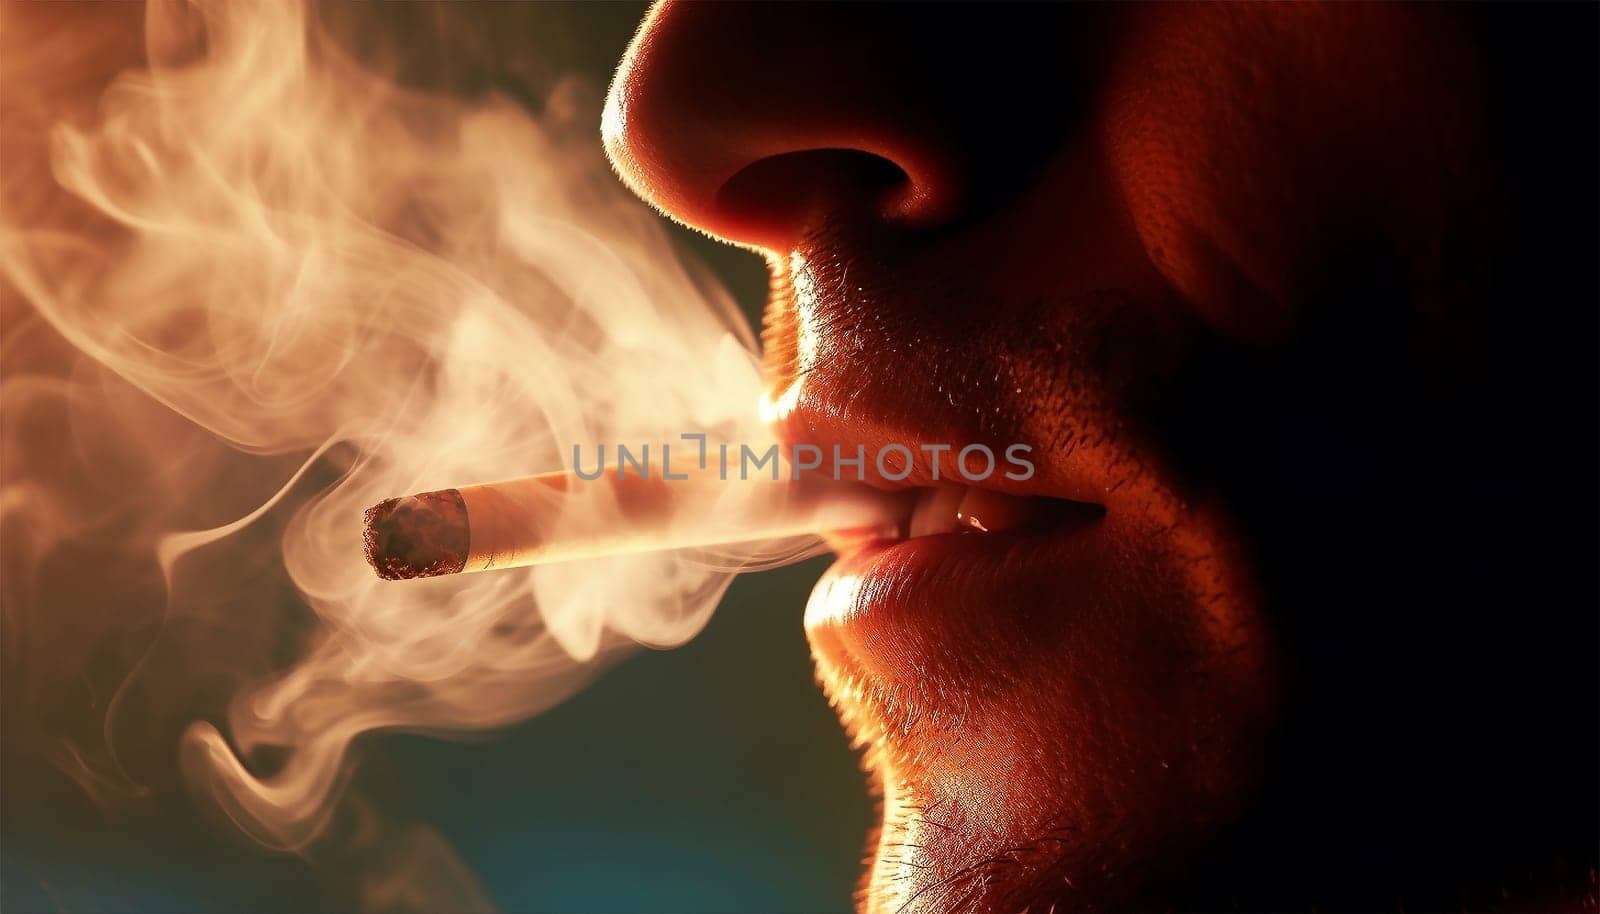 Stop smoking cigarettes concept. Portrait cigarette in mouth. Background surrounded with smoke. quitting smoking cigarettes. Quit bad habit, health care concept. No smoking. Copy space by Annebel146